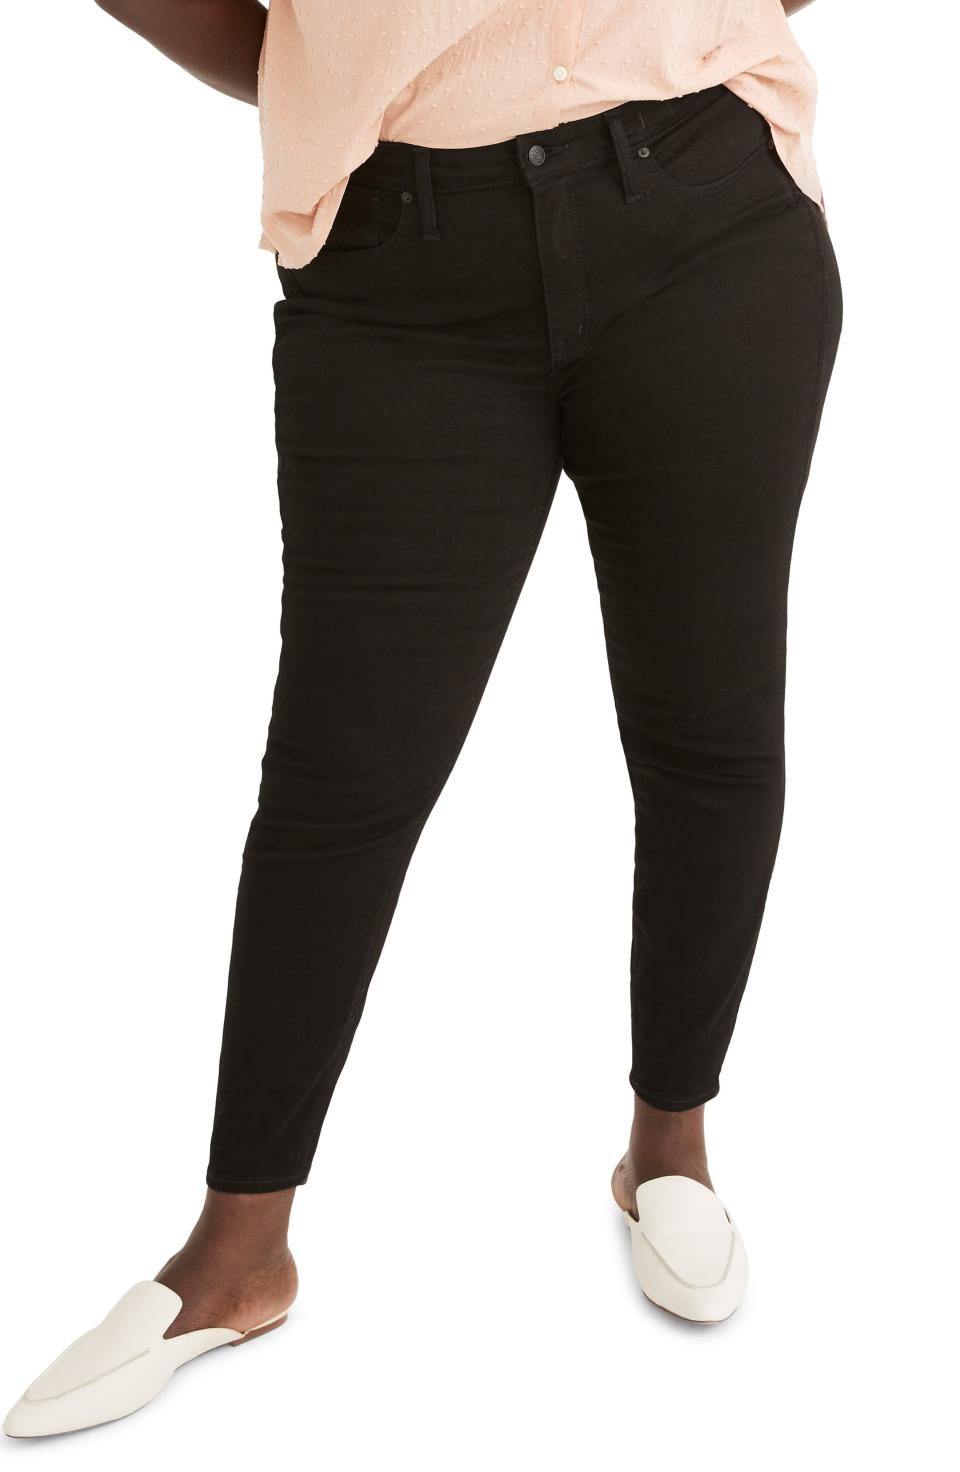 3) 10-Inch High Rise Skinny Jeans